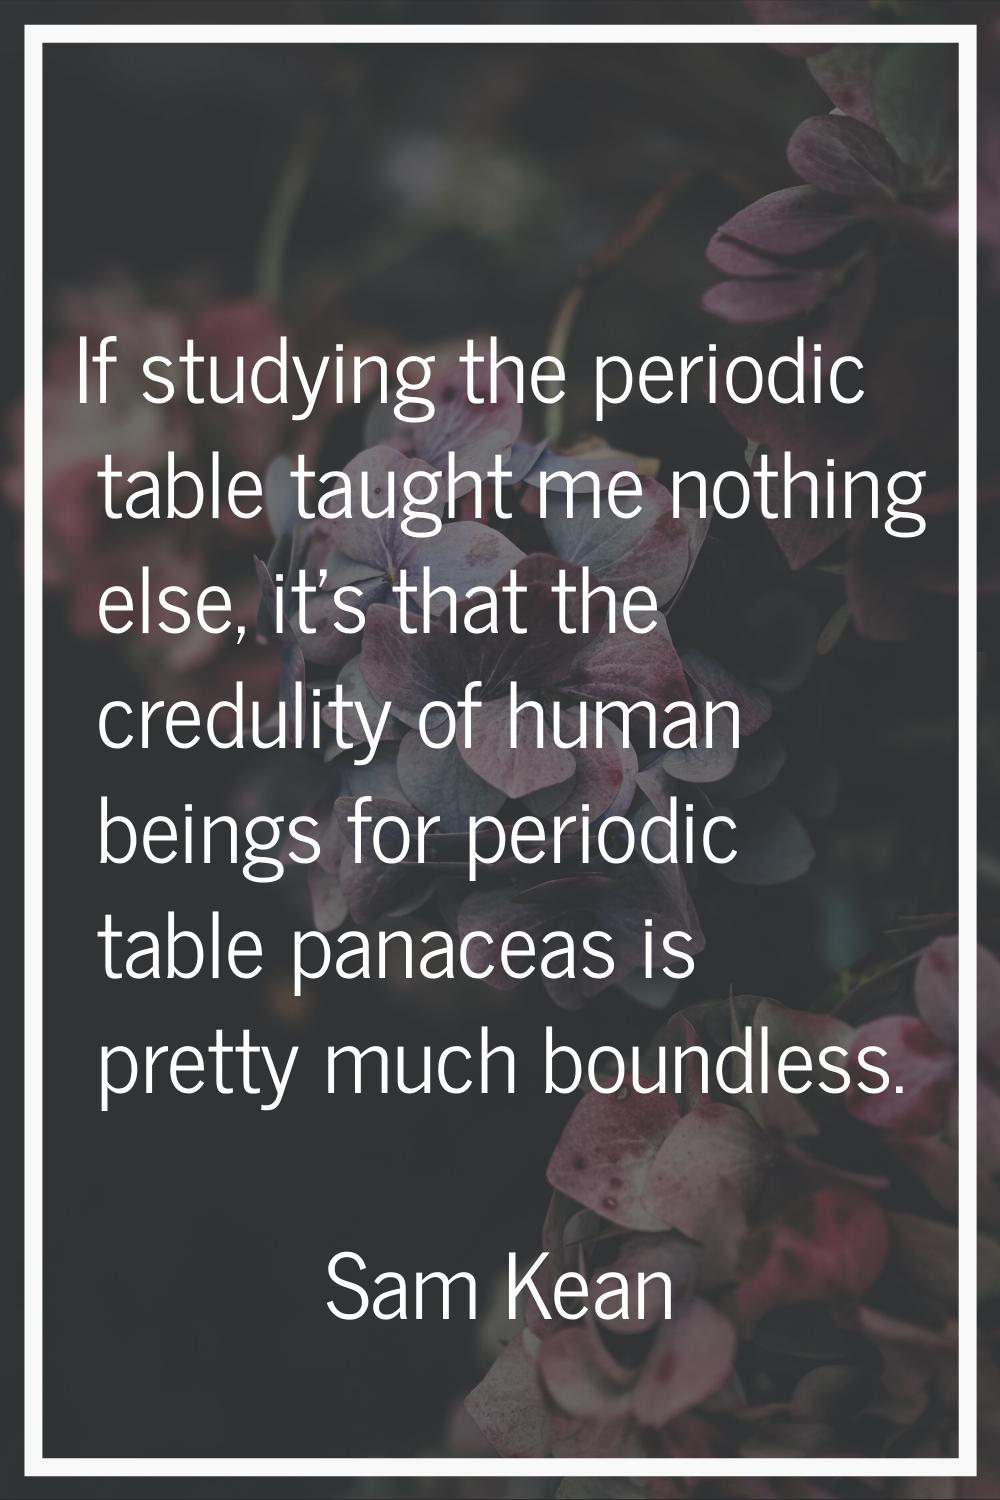 If studying the periodic table taught me nothing else, it's that the credulity of human beings for 